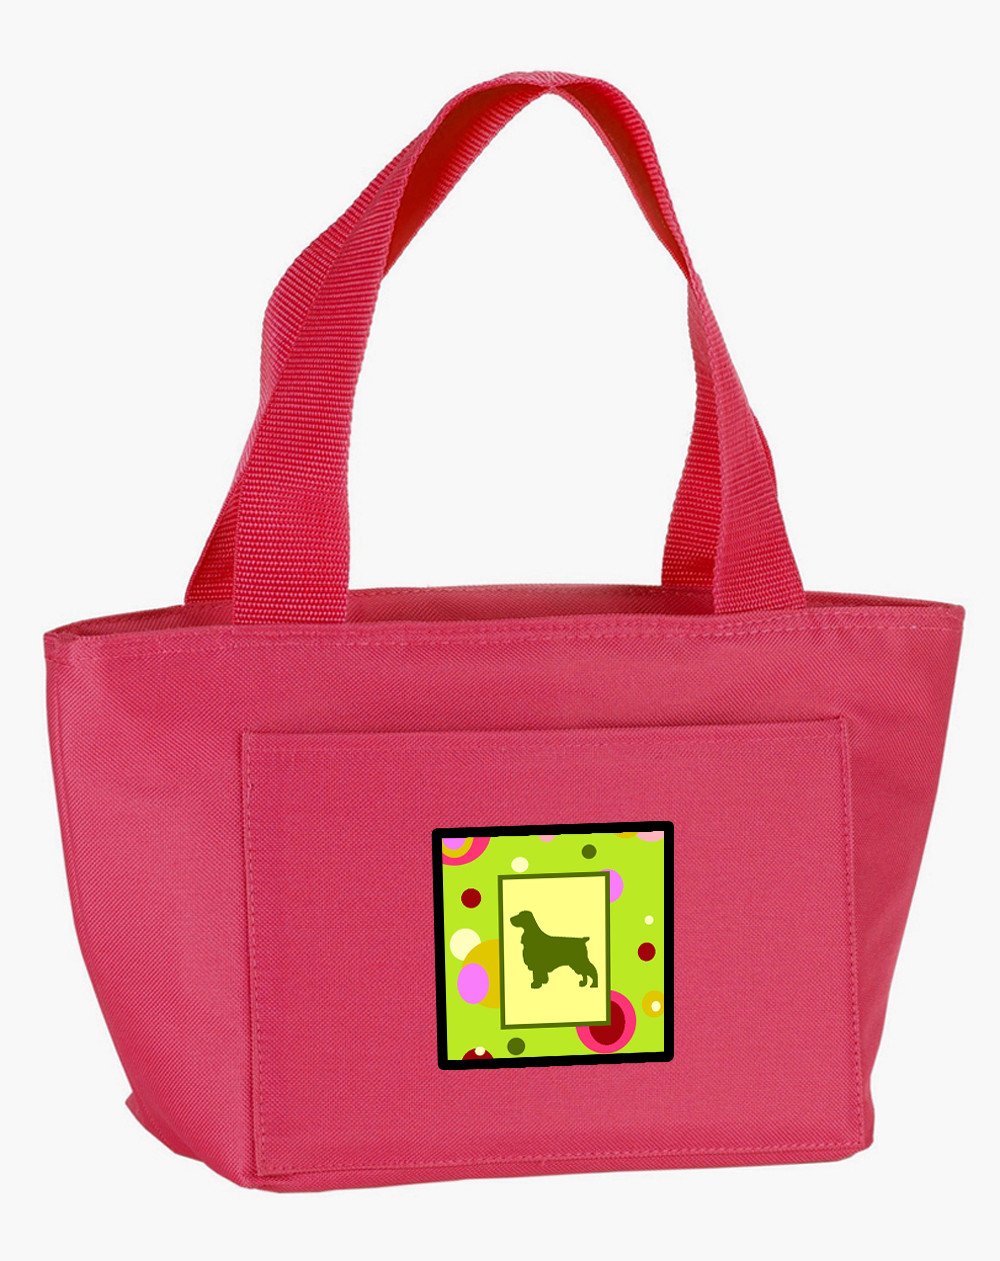 Lime Green Dots Field Spaniel Lunch Bag CK1030PK-8808 by Caroline's Treasures